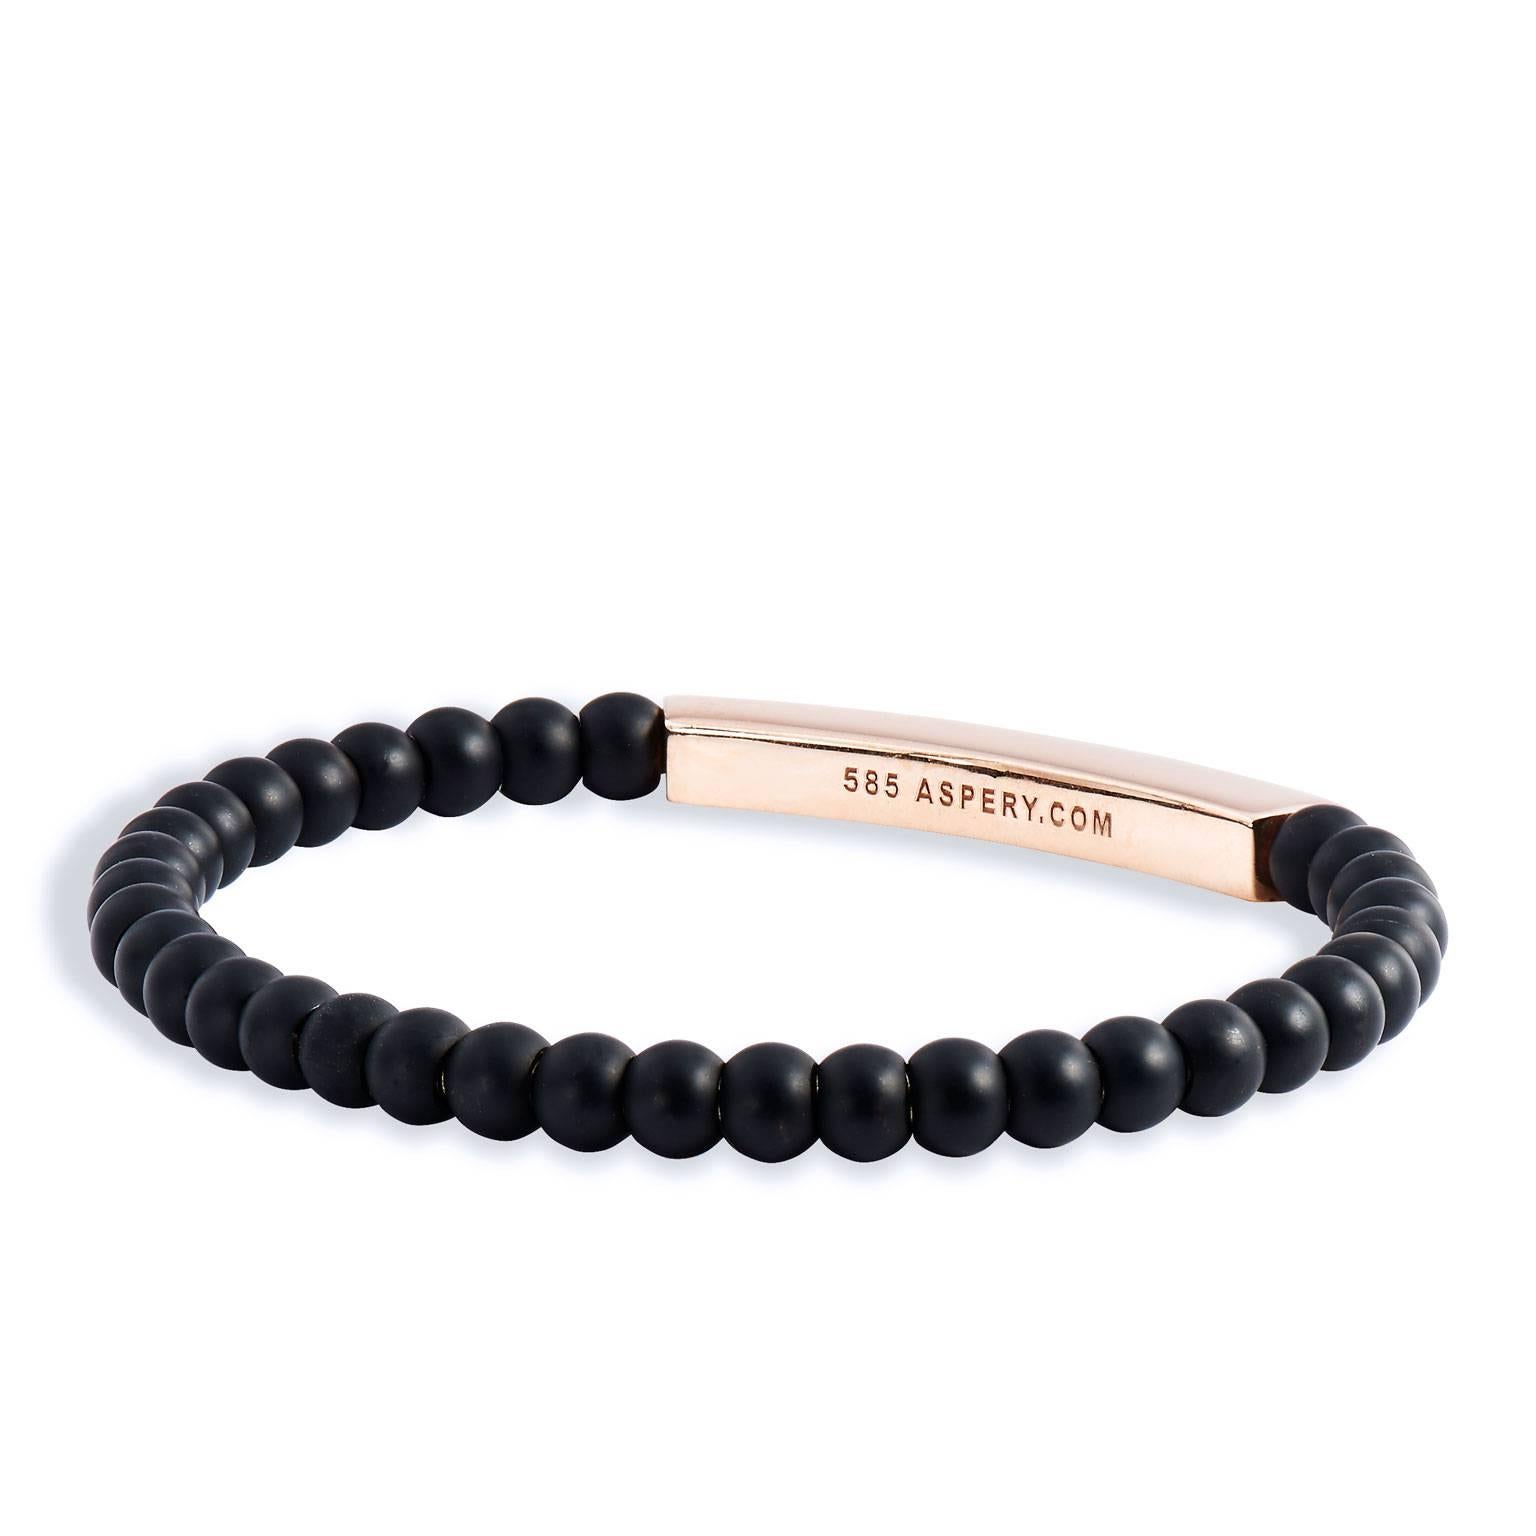 Bracelet with onyx beads (5mm bead size), rose gold two-row rectangular bar embellishment with 0.68 carat of diamond pave set and surgical steel insert.